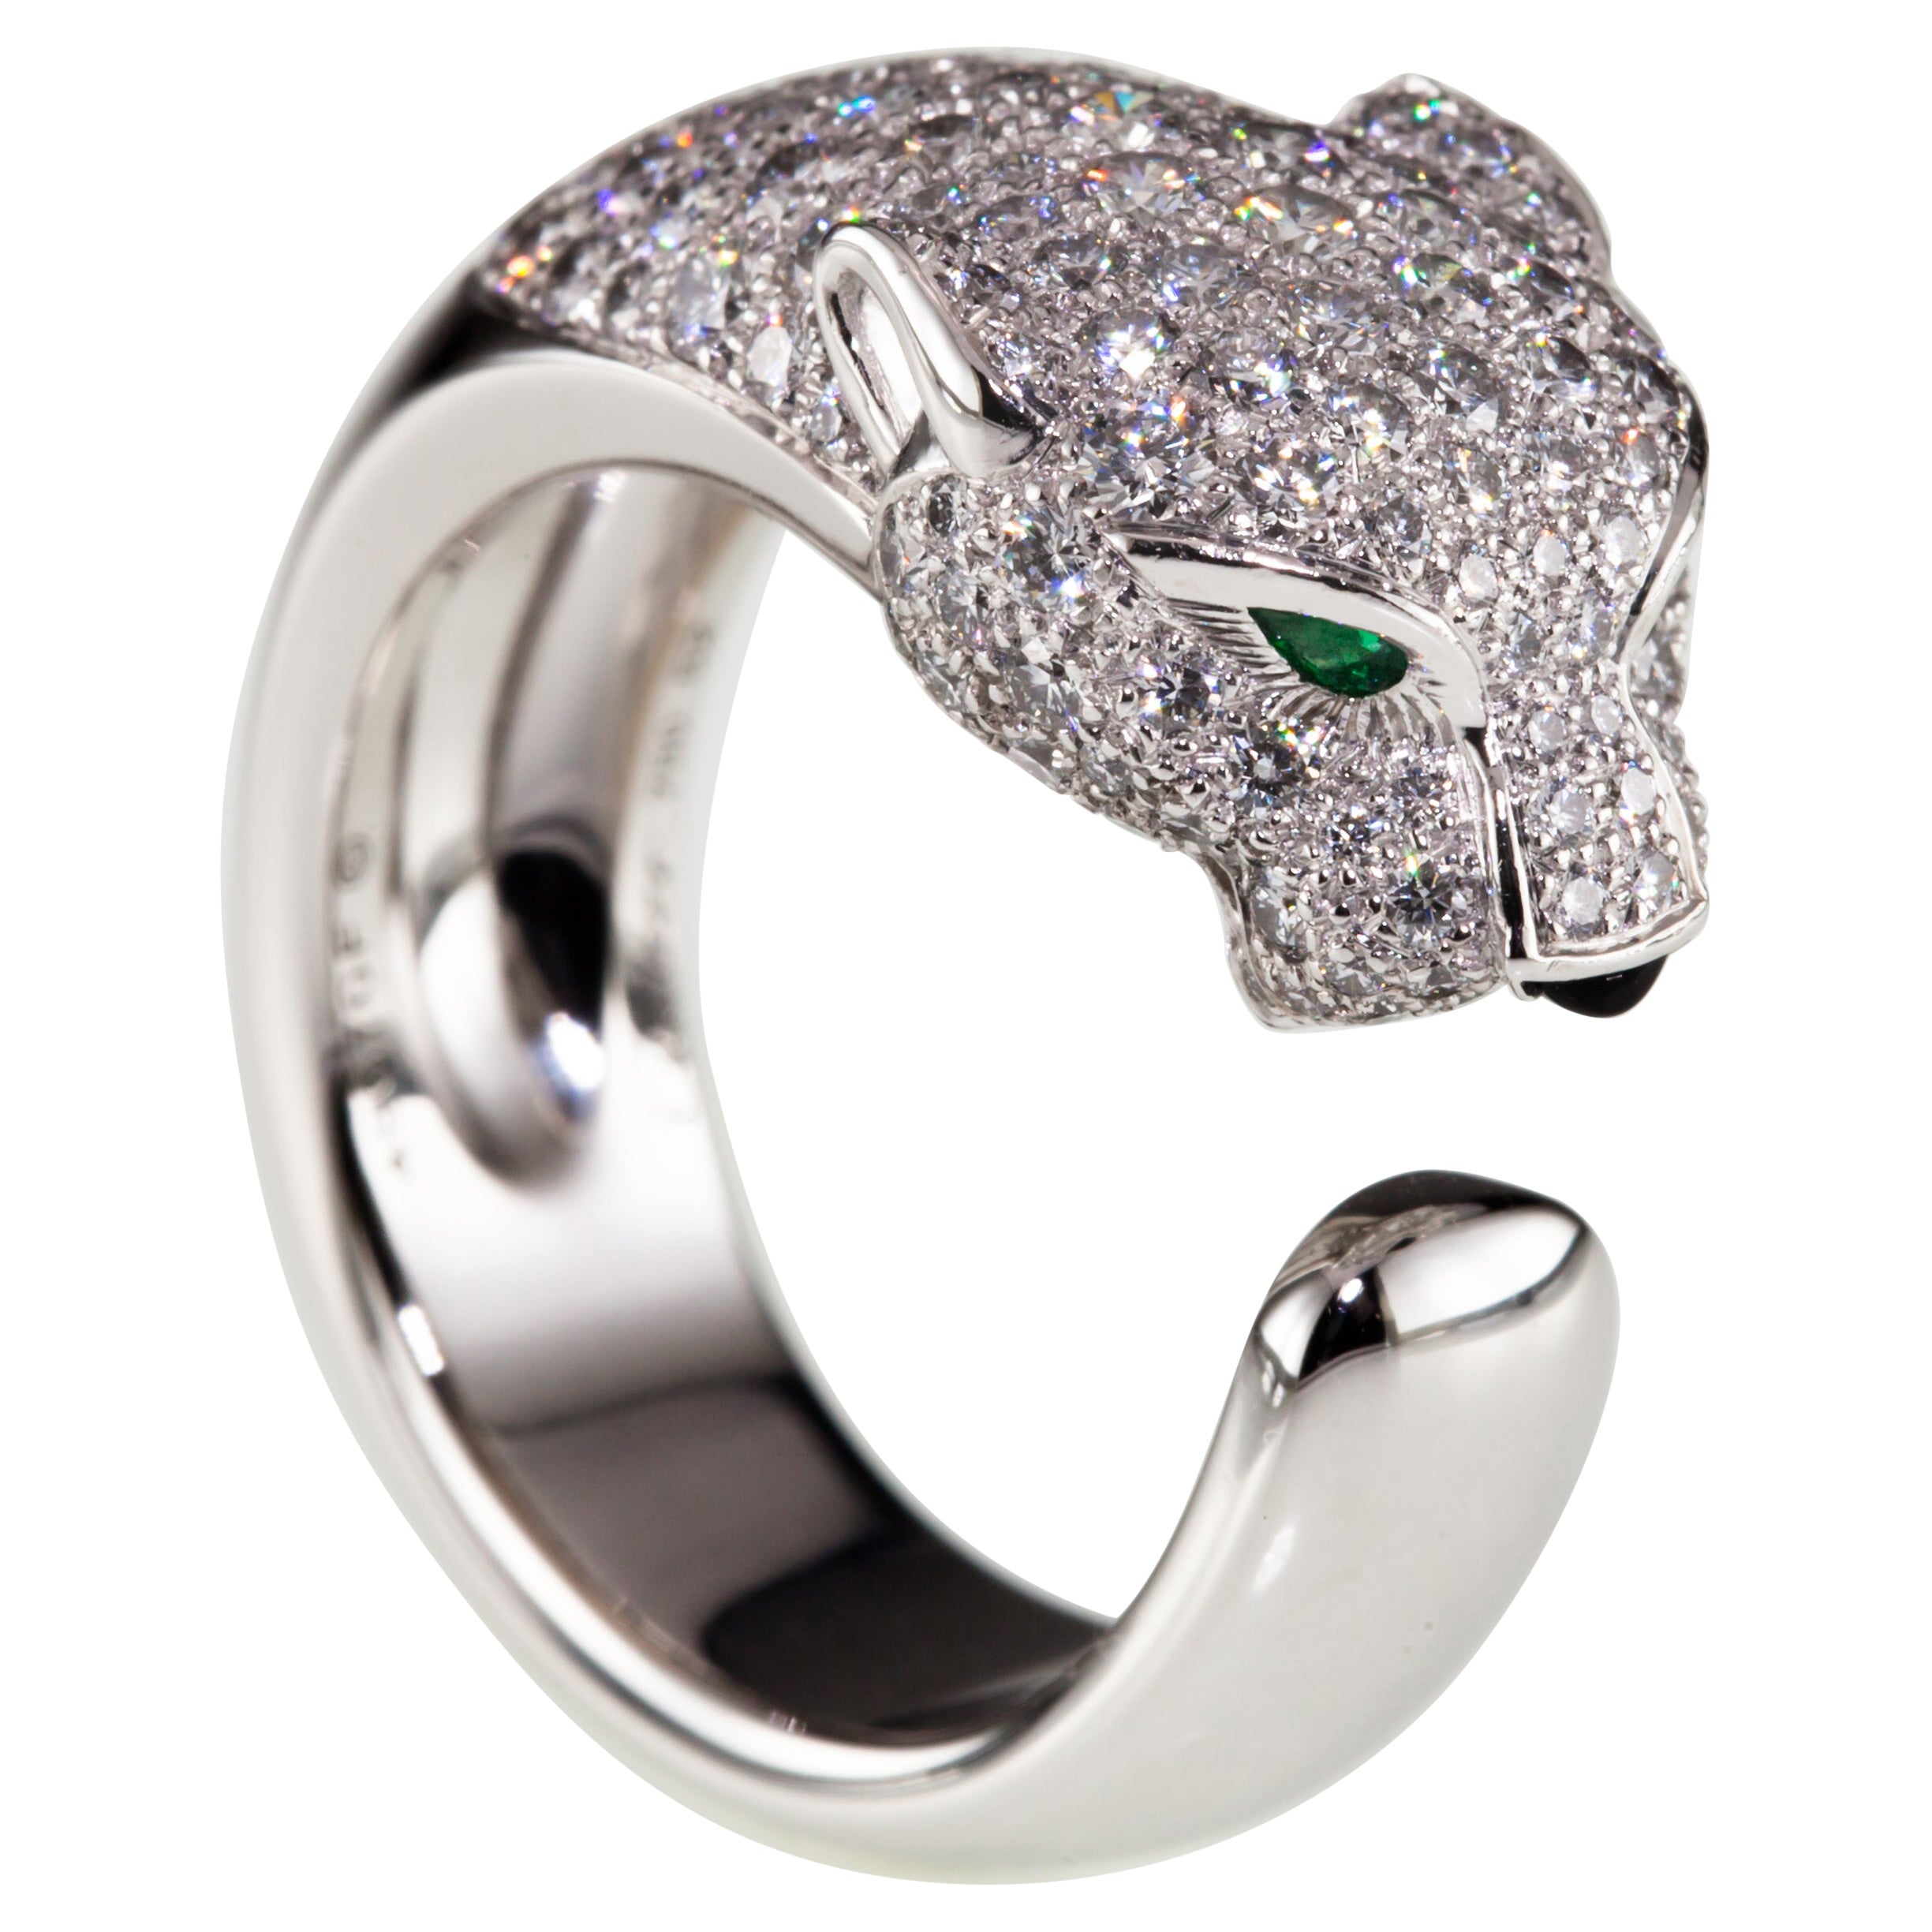 Panthere de Cartier Diamond Band Ring w/ Emerald and Onyx in White Gold